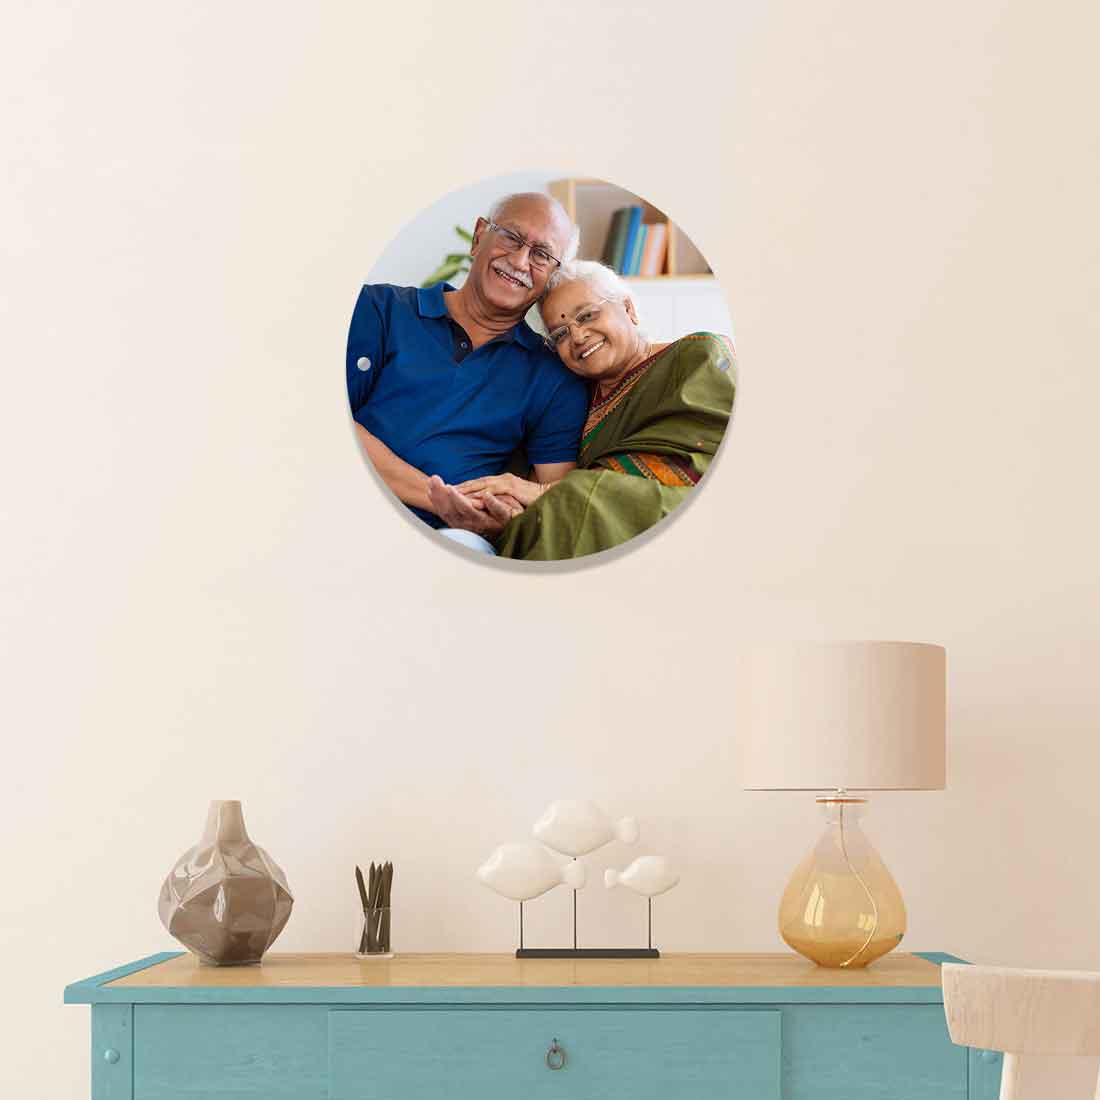 Acrylic Wall Photo - Premium Lucite Picture Frame with high definition printing - Available in Square and Circle